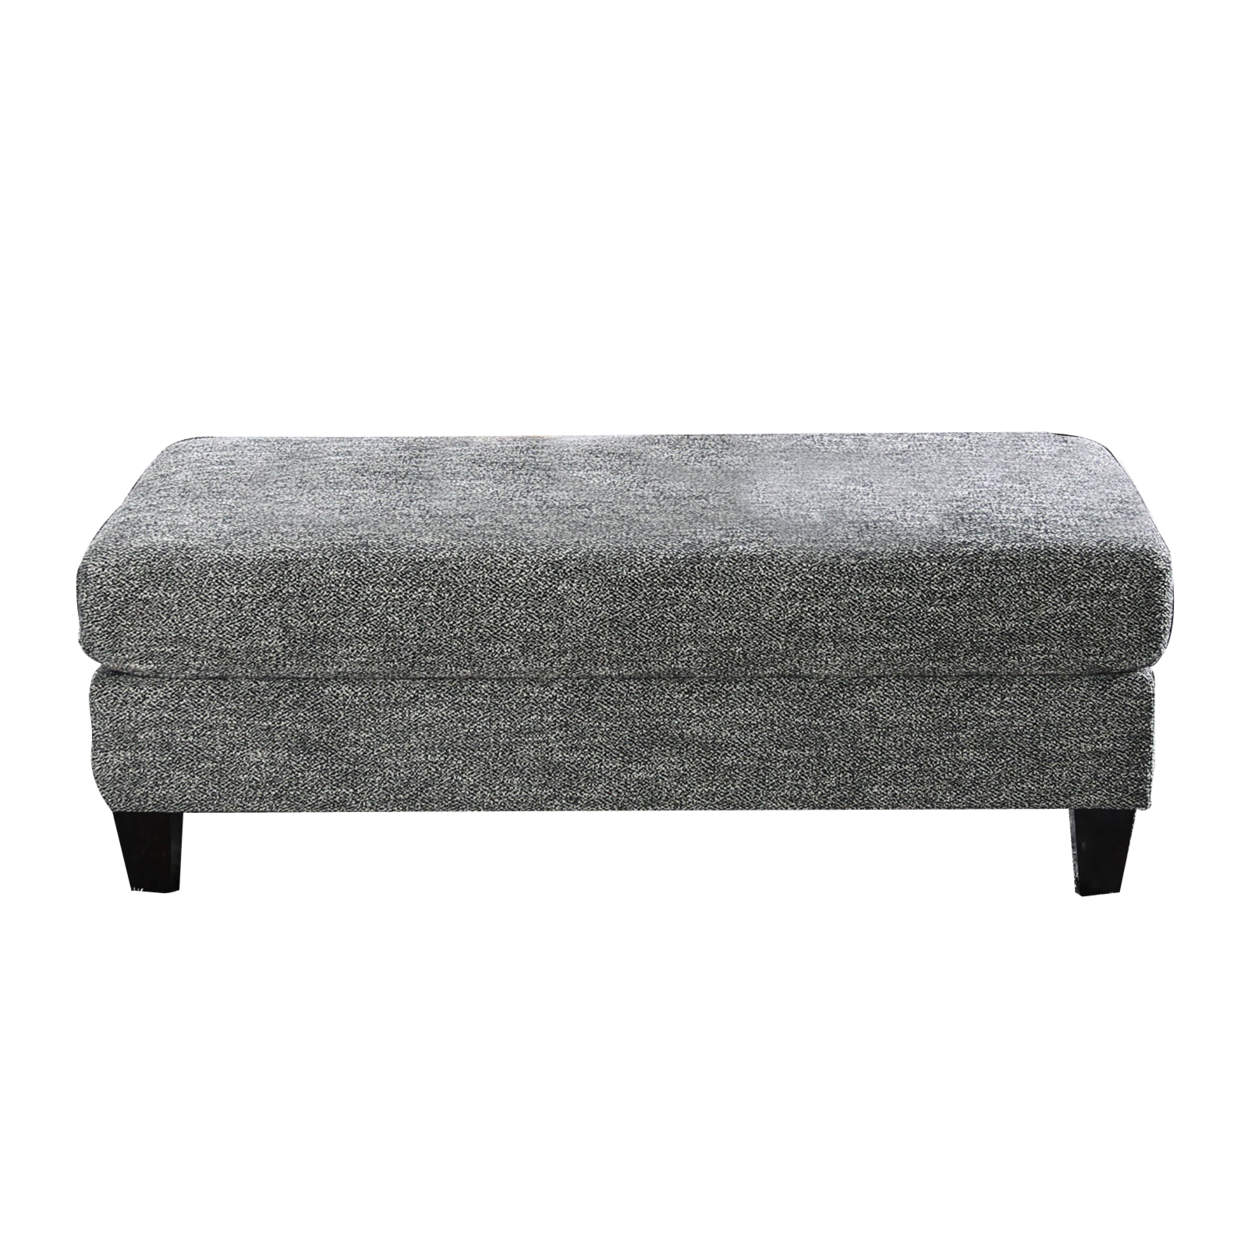 52 Inch Modern Ottoman With Textured Gray Fabric, Plush Foaming